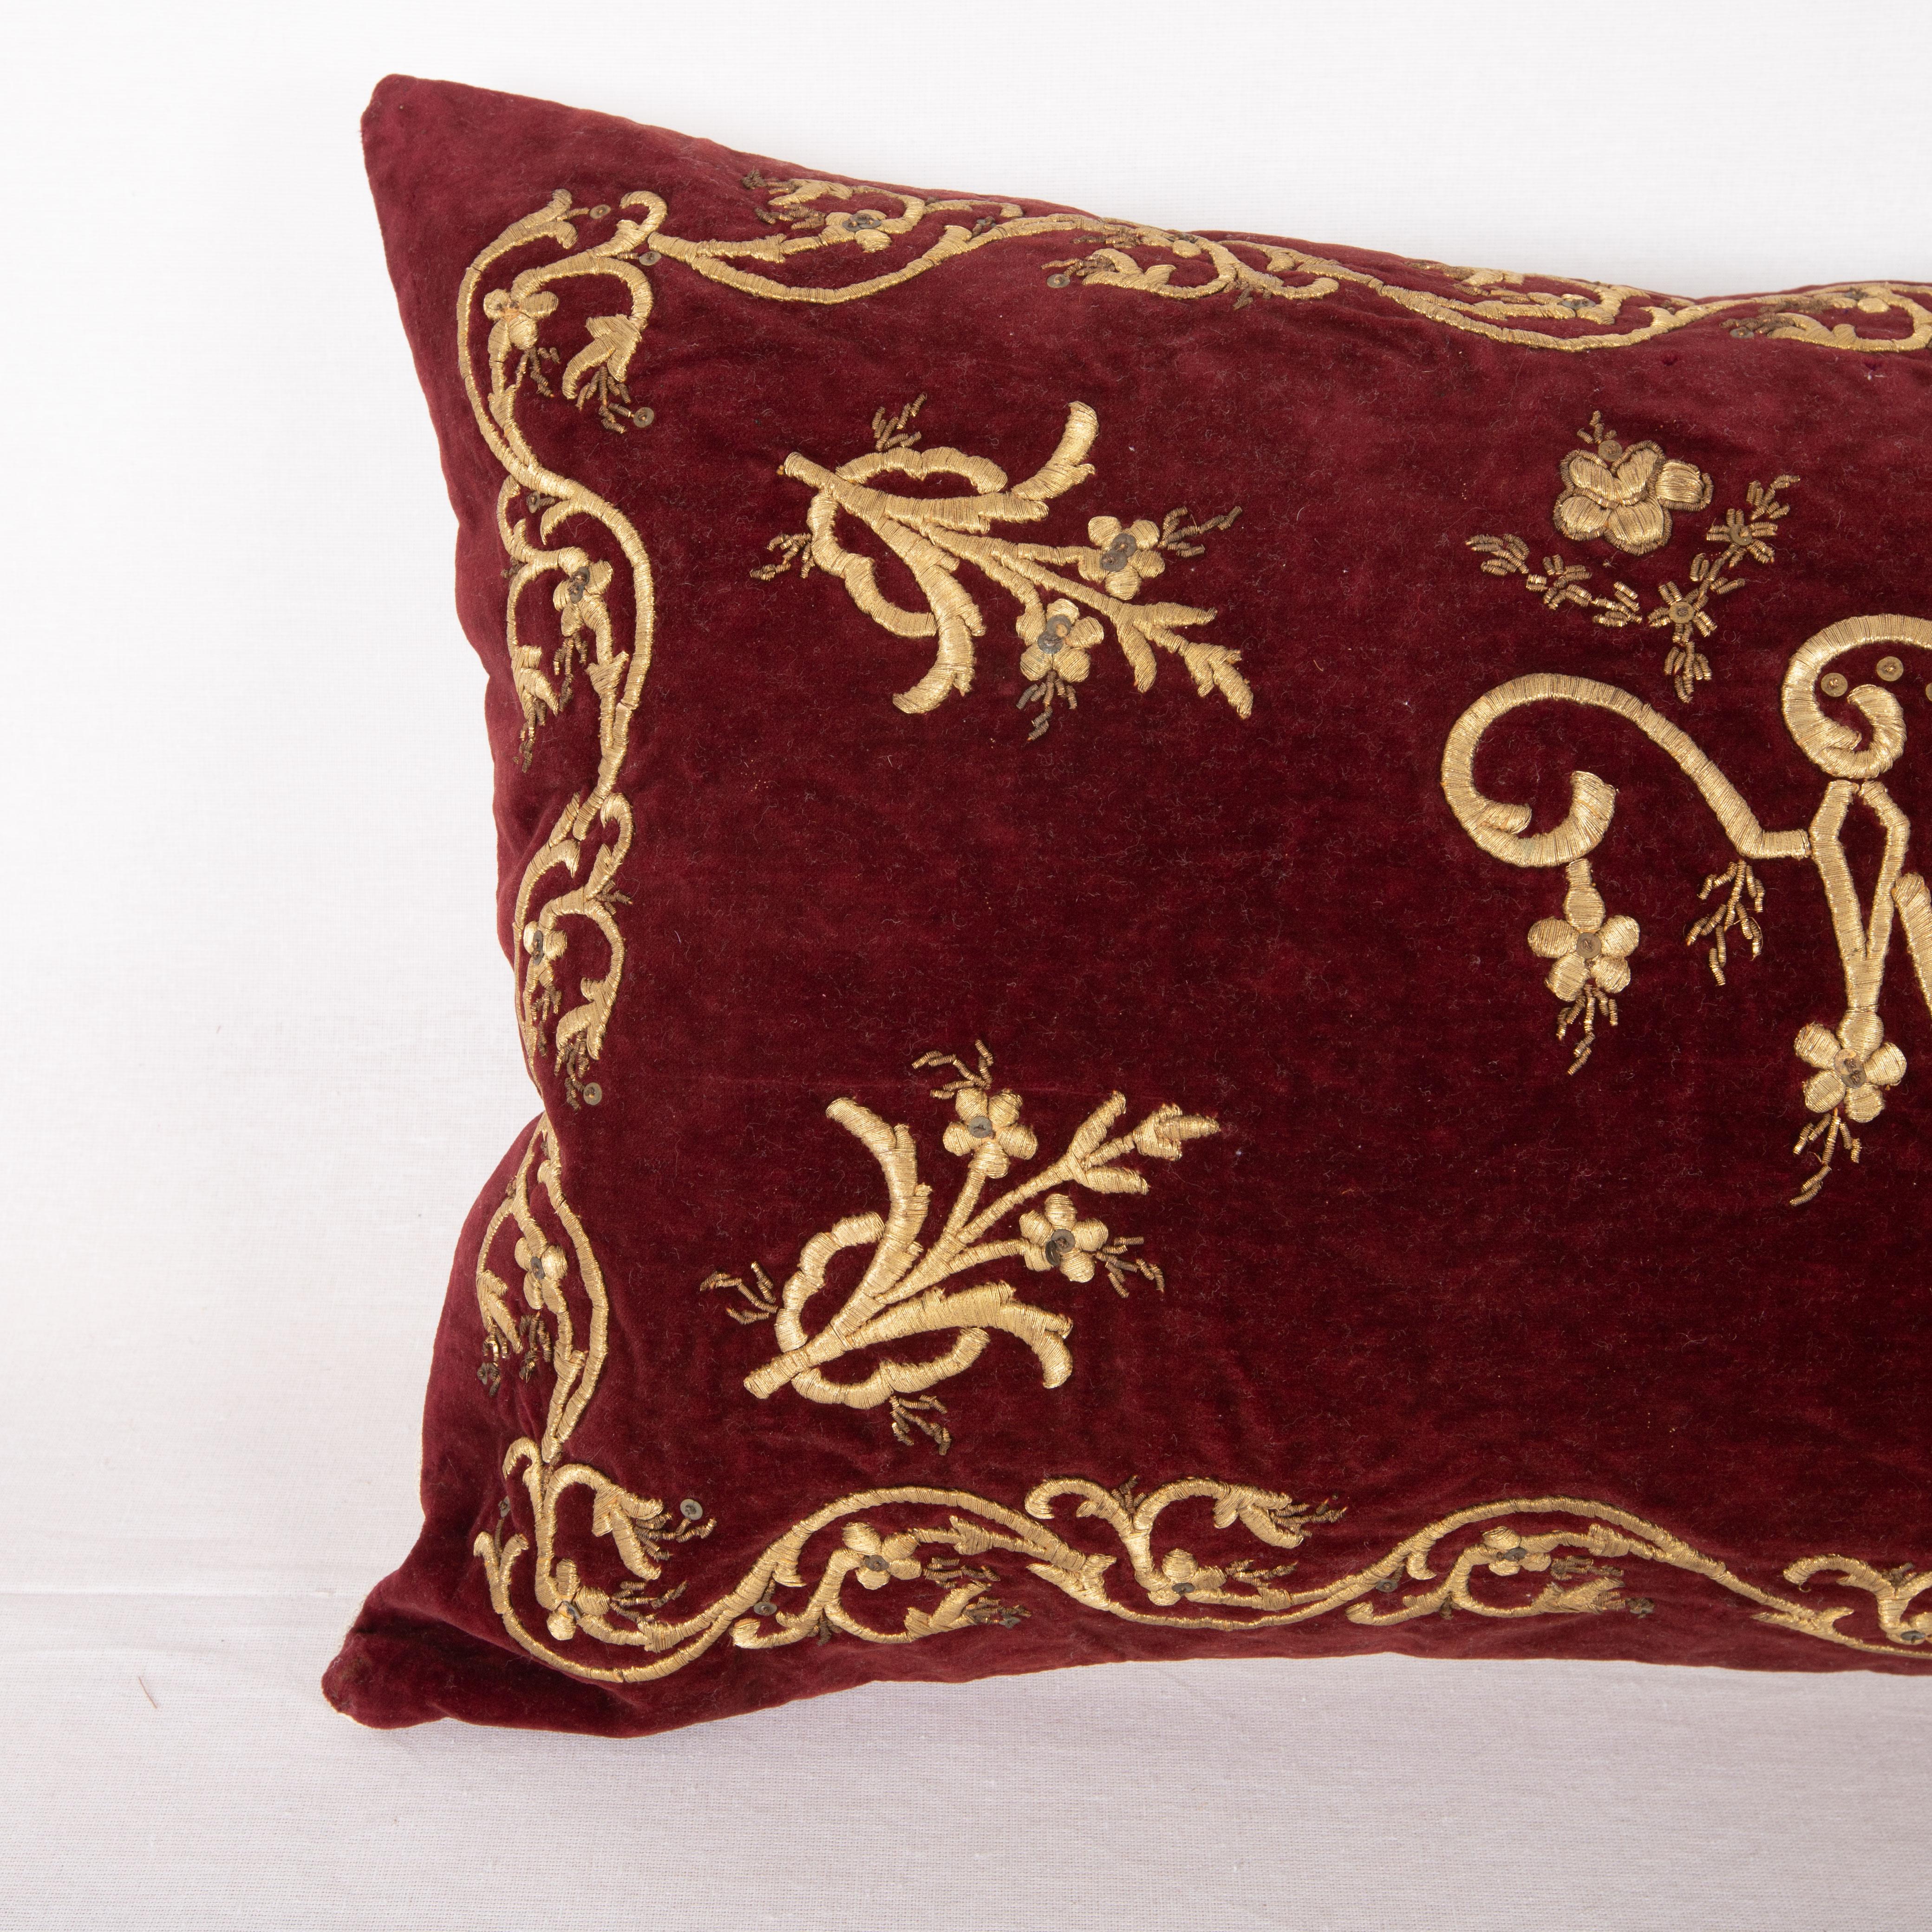 Embroidered Antique Silk Velvet Ottoman Sarma Pillow Cover, L 19th C. For Sale